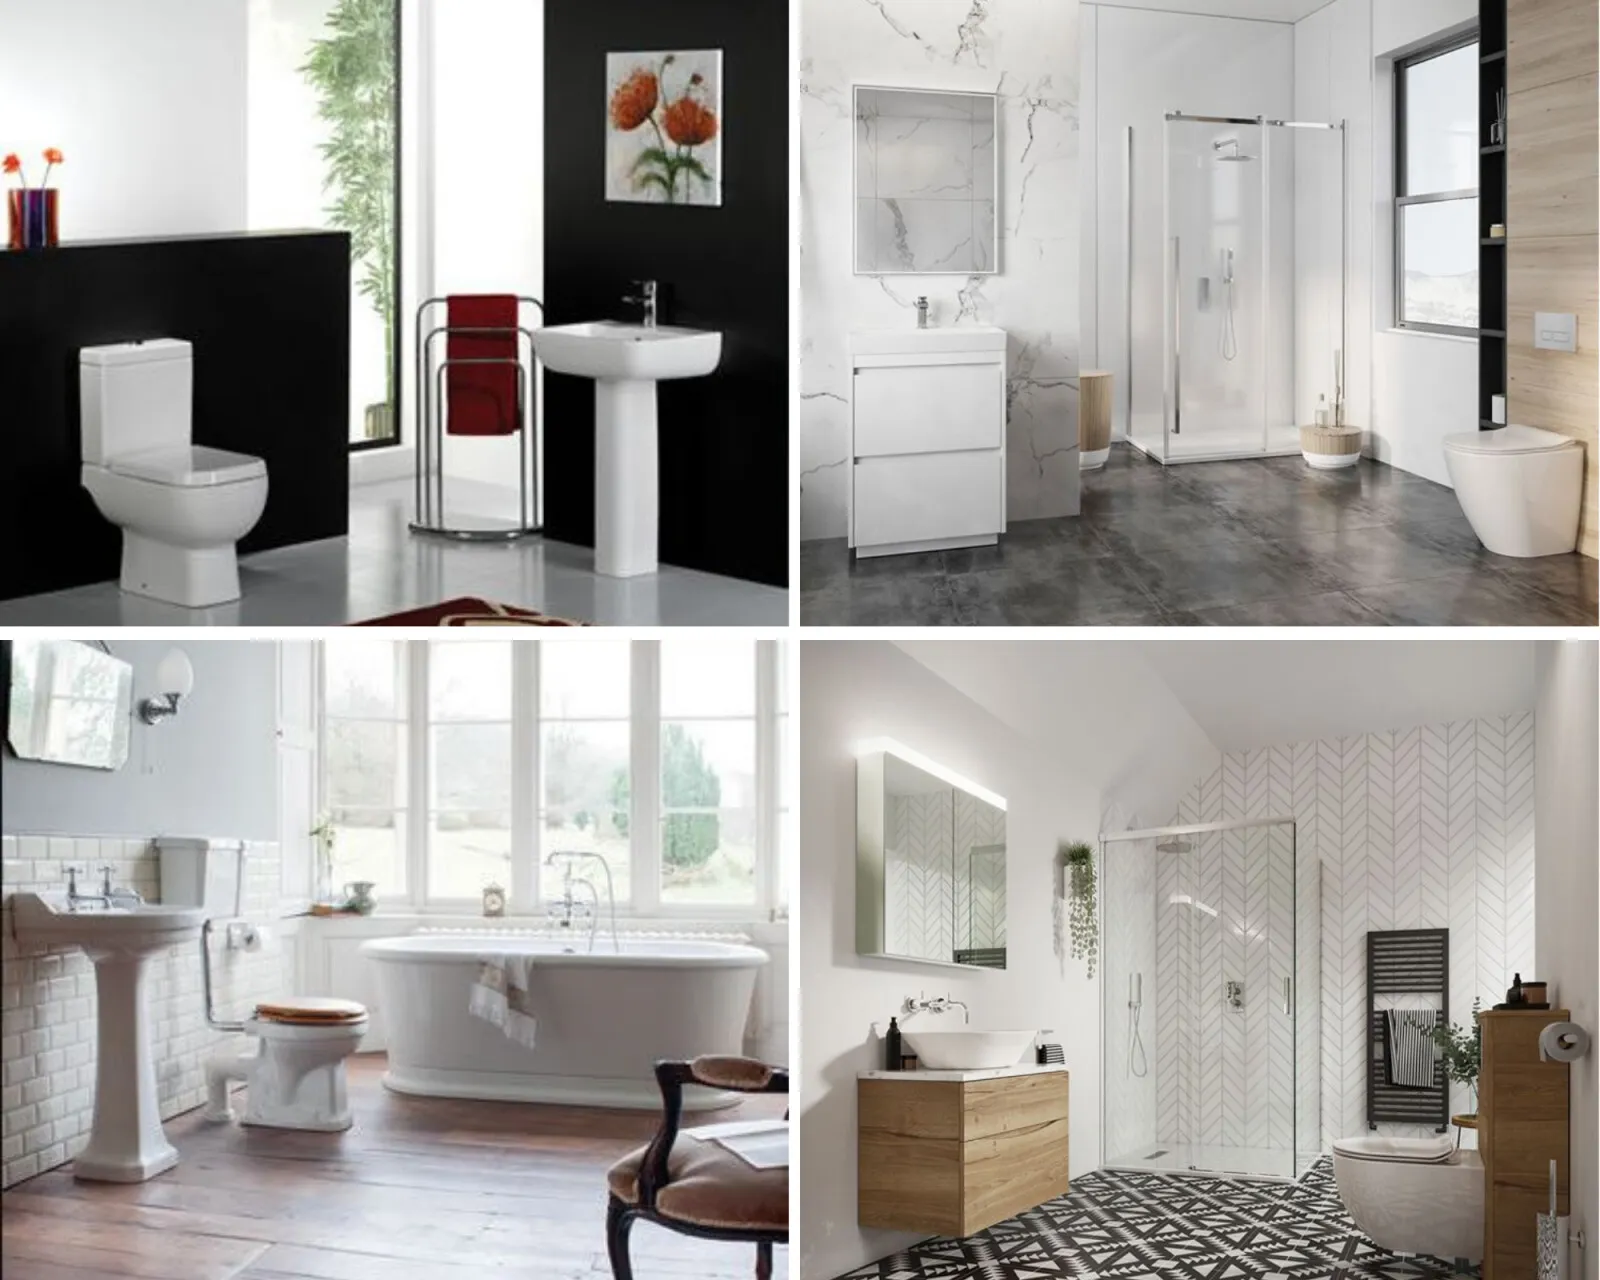 Collage of images of bathroom suites